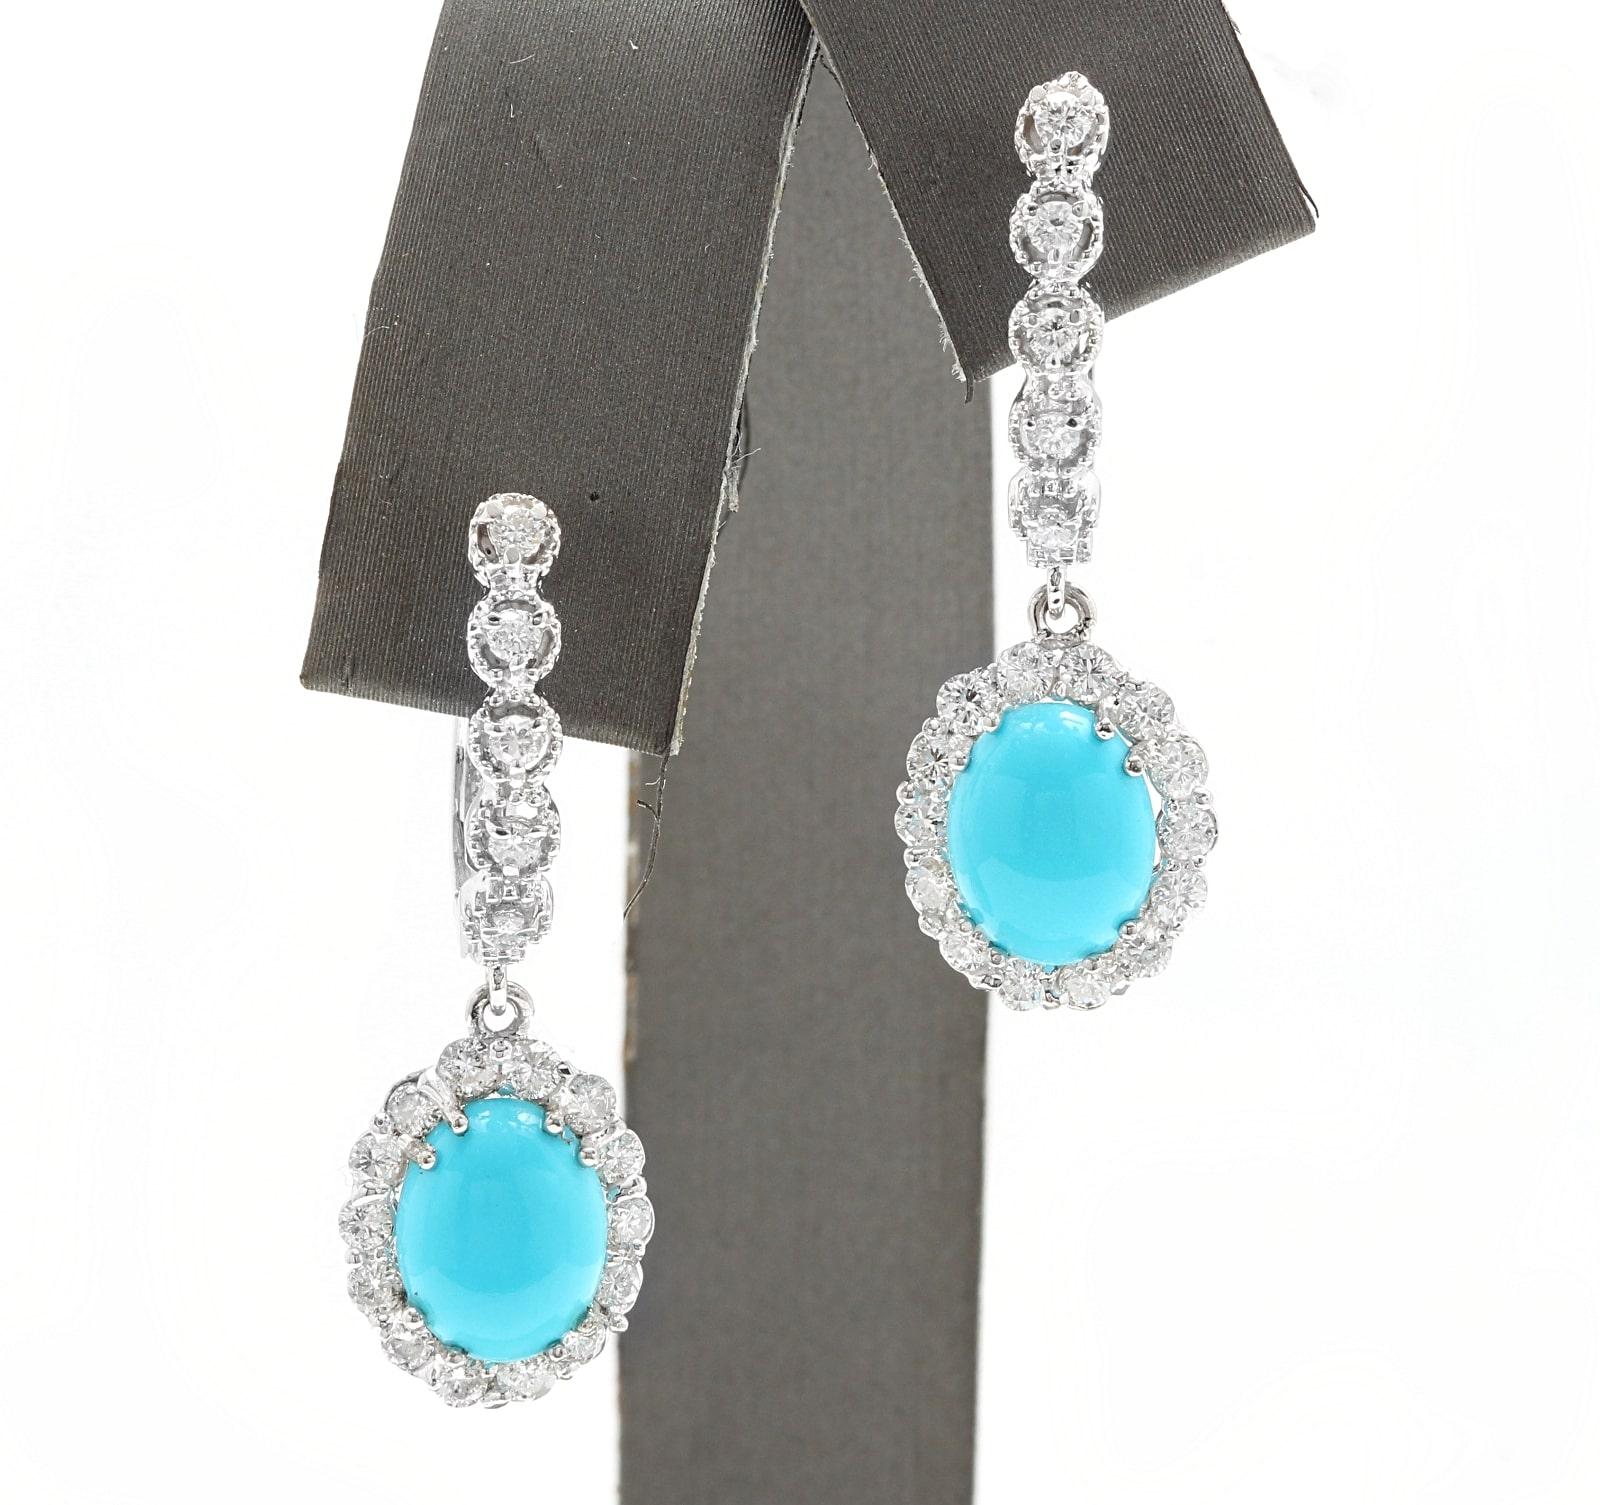 Exquisite 6.20 Carats Natural Turquoise and Diamond 14K Solid White Gold Earrings

Amazing looking piece! 

Suggested Replacement Value: Approx. $5,500.00 

Total Natural Round Cut White Diamonds Weight: Approx. 1.20 Carats (color G-H / Clarity